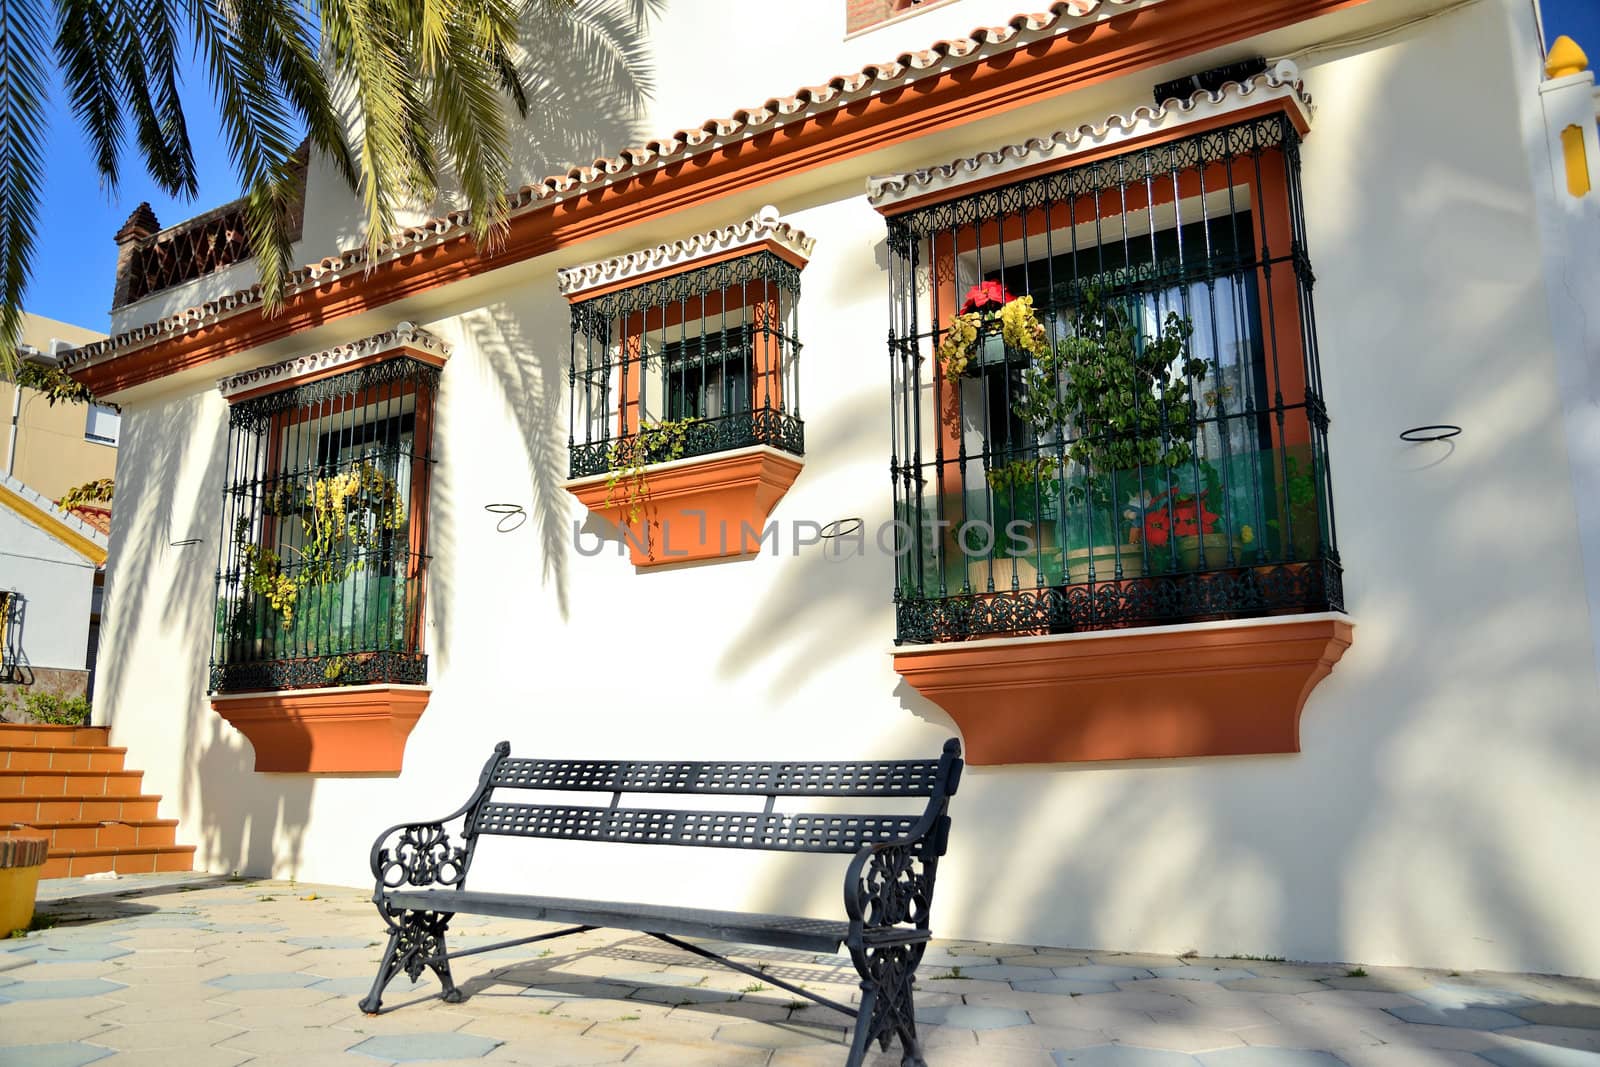 Sacristy of the old church in Estepona, located near the port